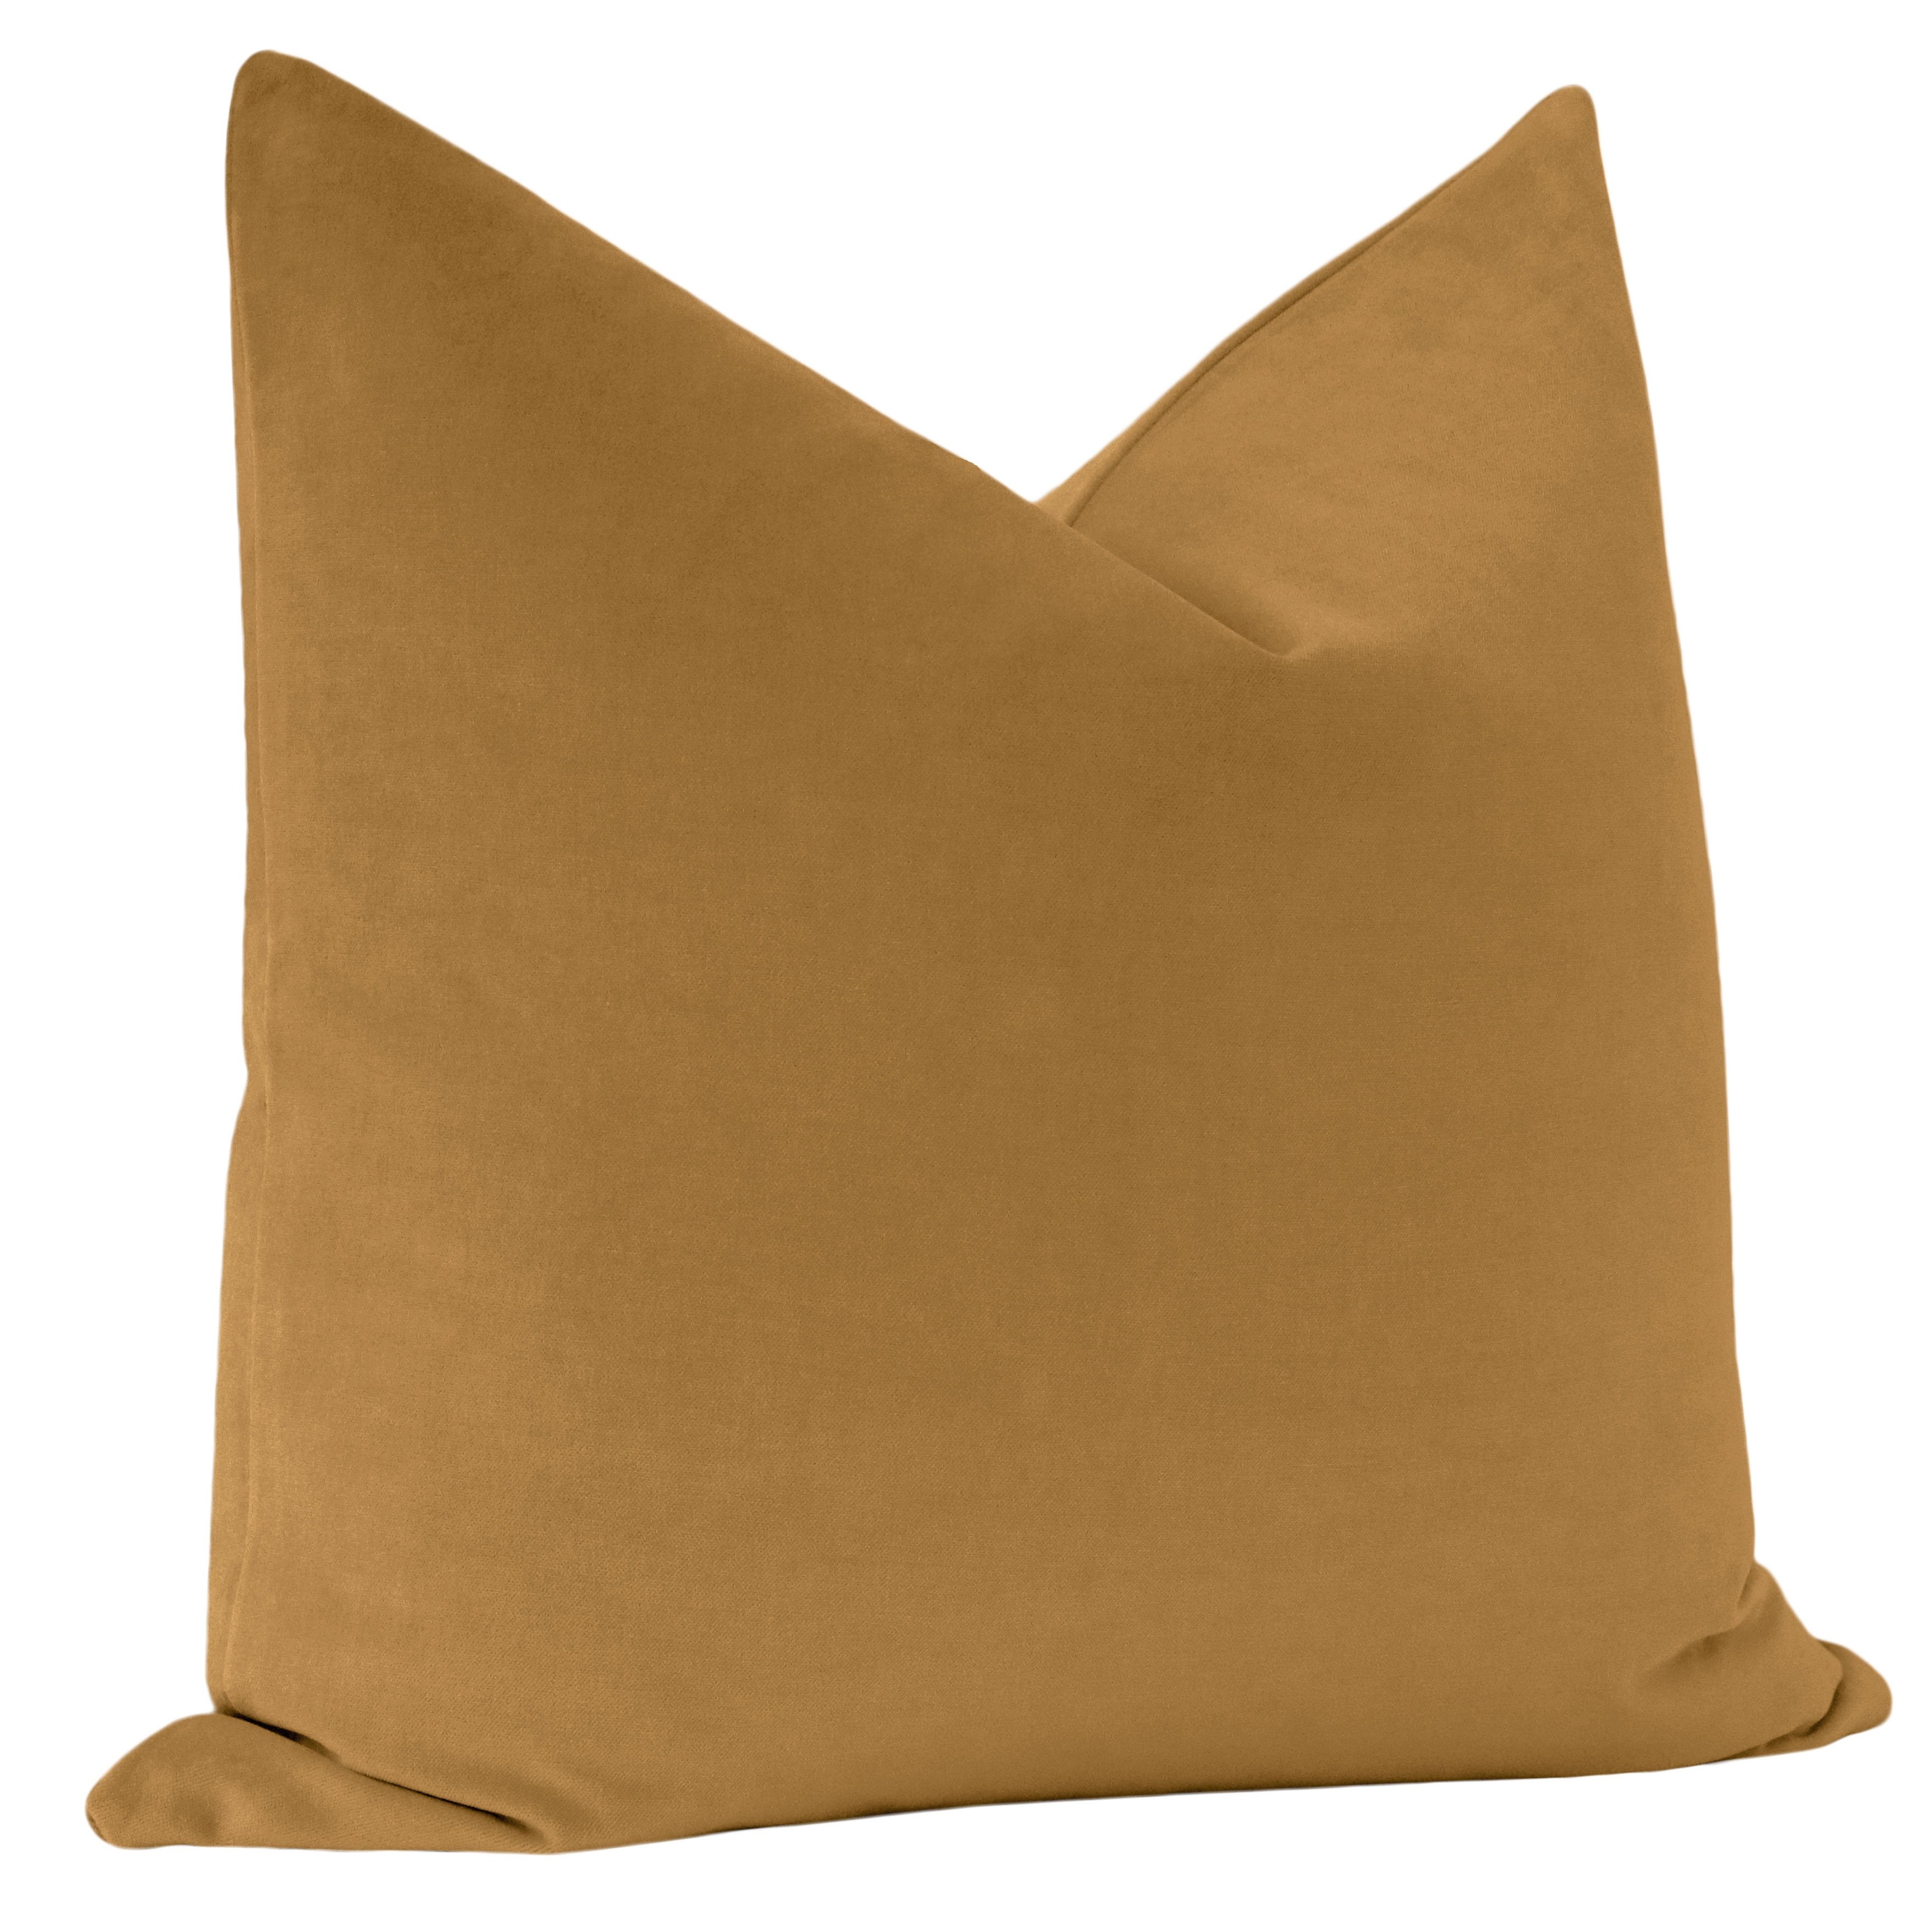 Classic Velvet Throw Pillow Cover, Sable, 18" x 18" - Image 1